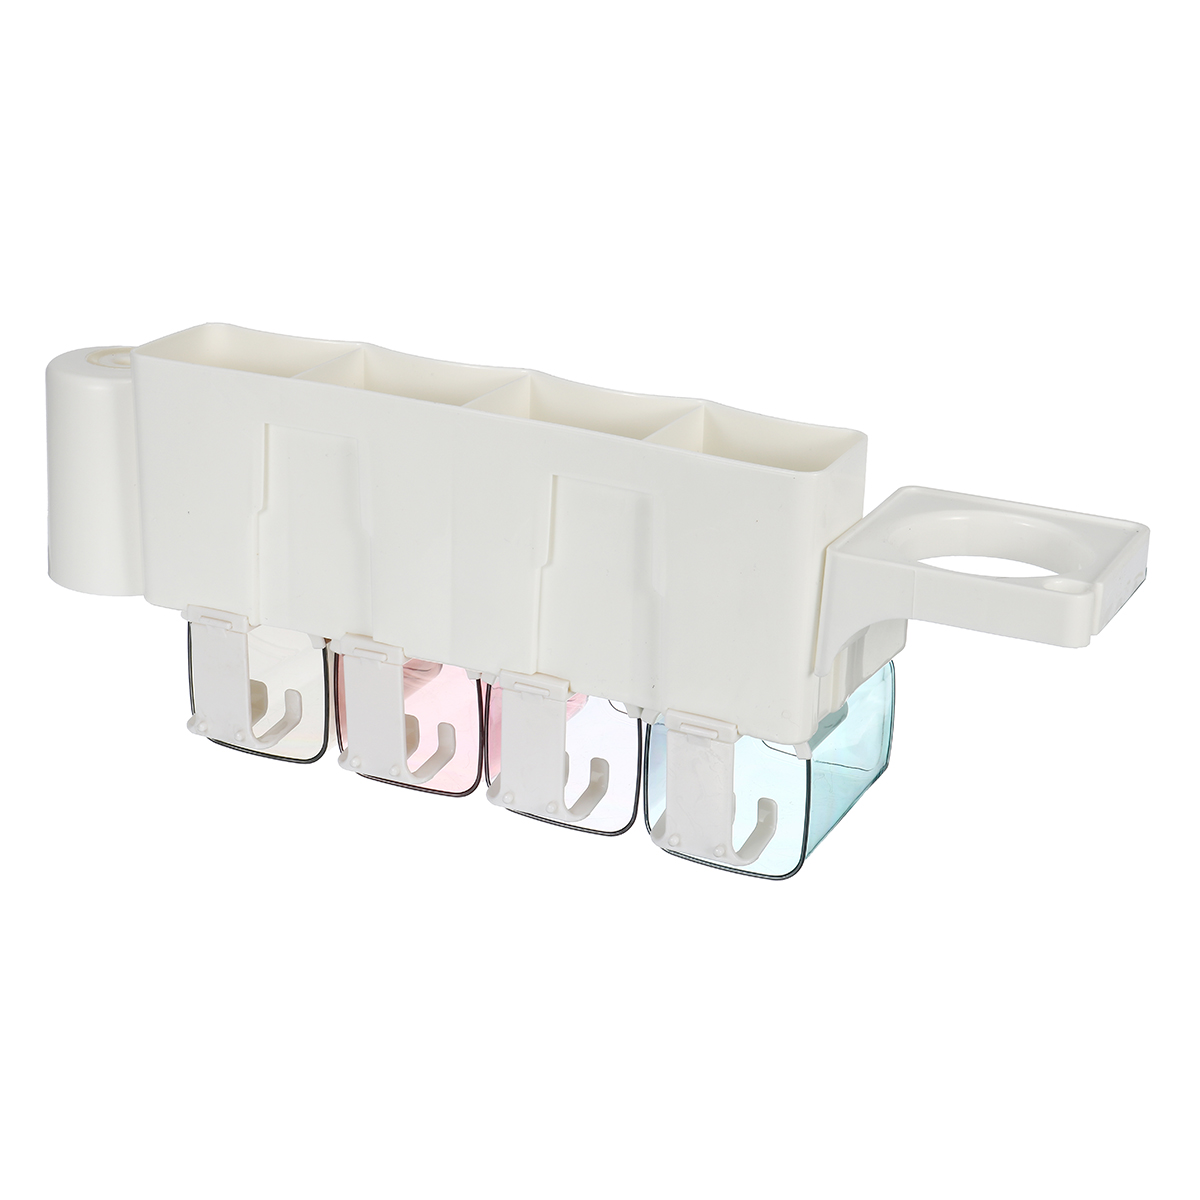 Toothpaste-Holders-Toothbrush-Rack-Wall-Mounted-Space-Saving-Toothbrush-Toothpaste-Squeezer-Kit-With-1801949-15